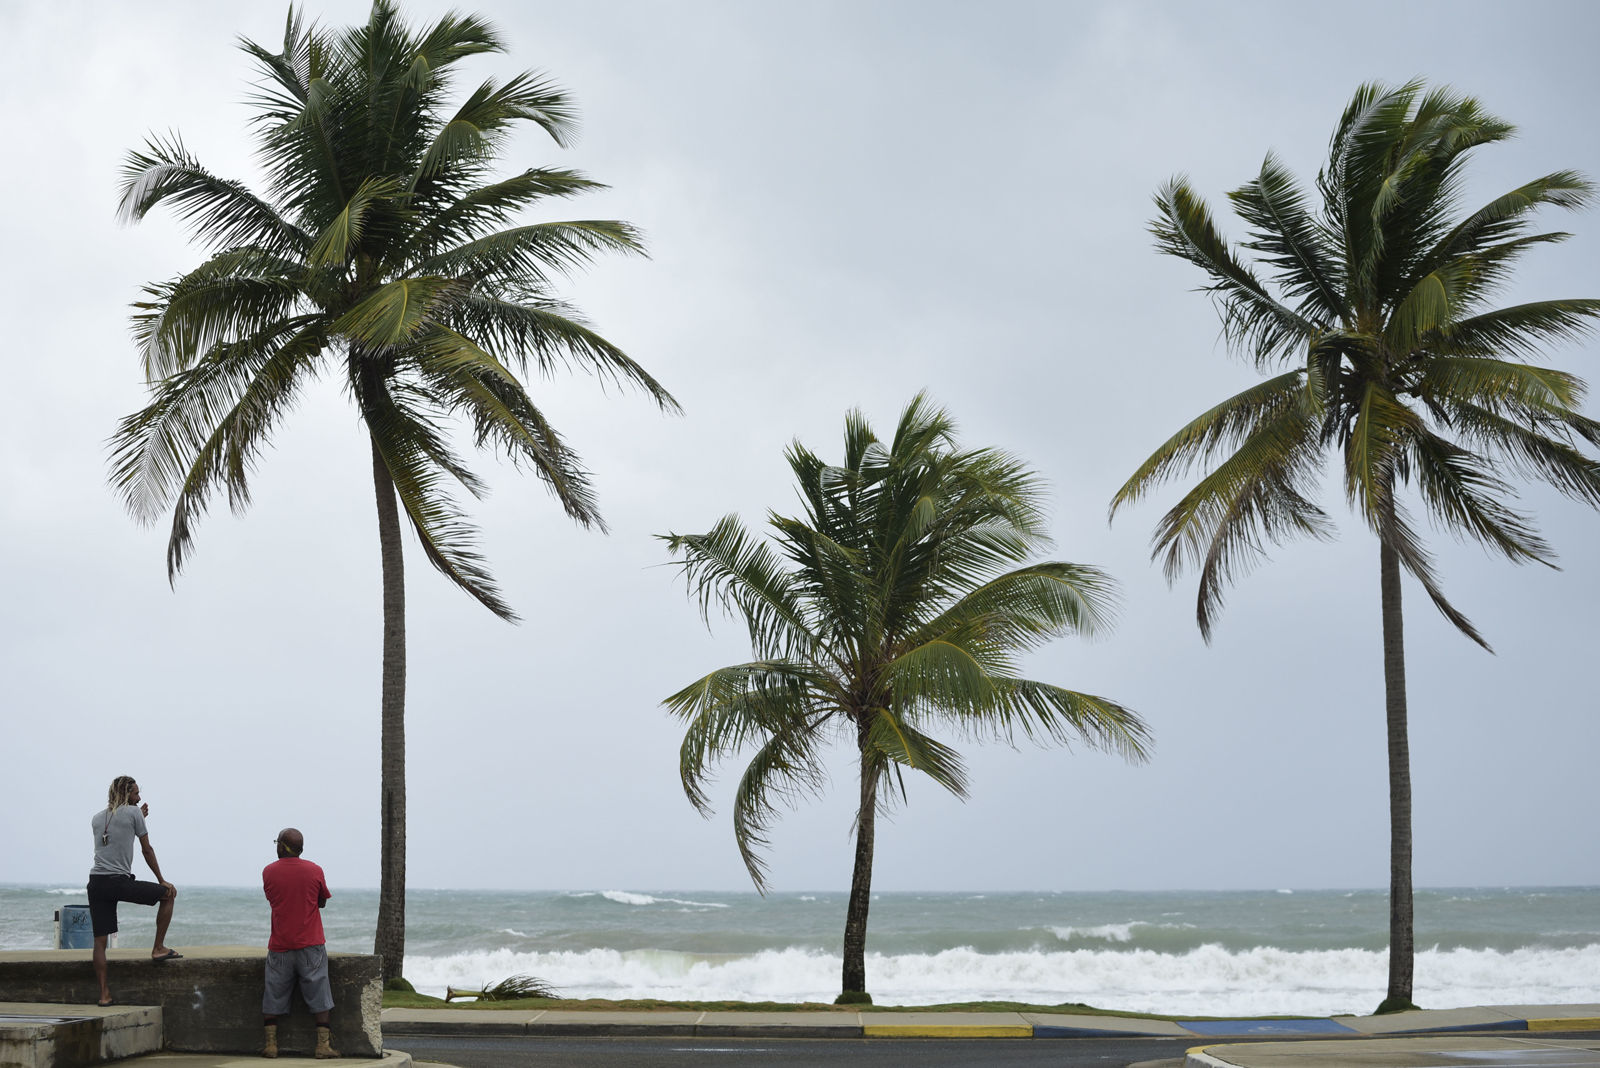 People stand near the shore before the arrival of Hurricane Irma, in luquillo, Puerto Rico, Wednesday, Sept. 6, 2017. Irma roared into the Caribbean with record force early Wednesday, its 185-mph winds shaking homes and flooding buildings on a chain of small islands along a path toward Puerto Rico, Cuba and Hispaniola and a possible direct hit on densely populated South Florida. (AP Photo/Carlos Giusti)